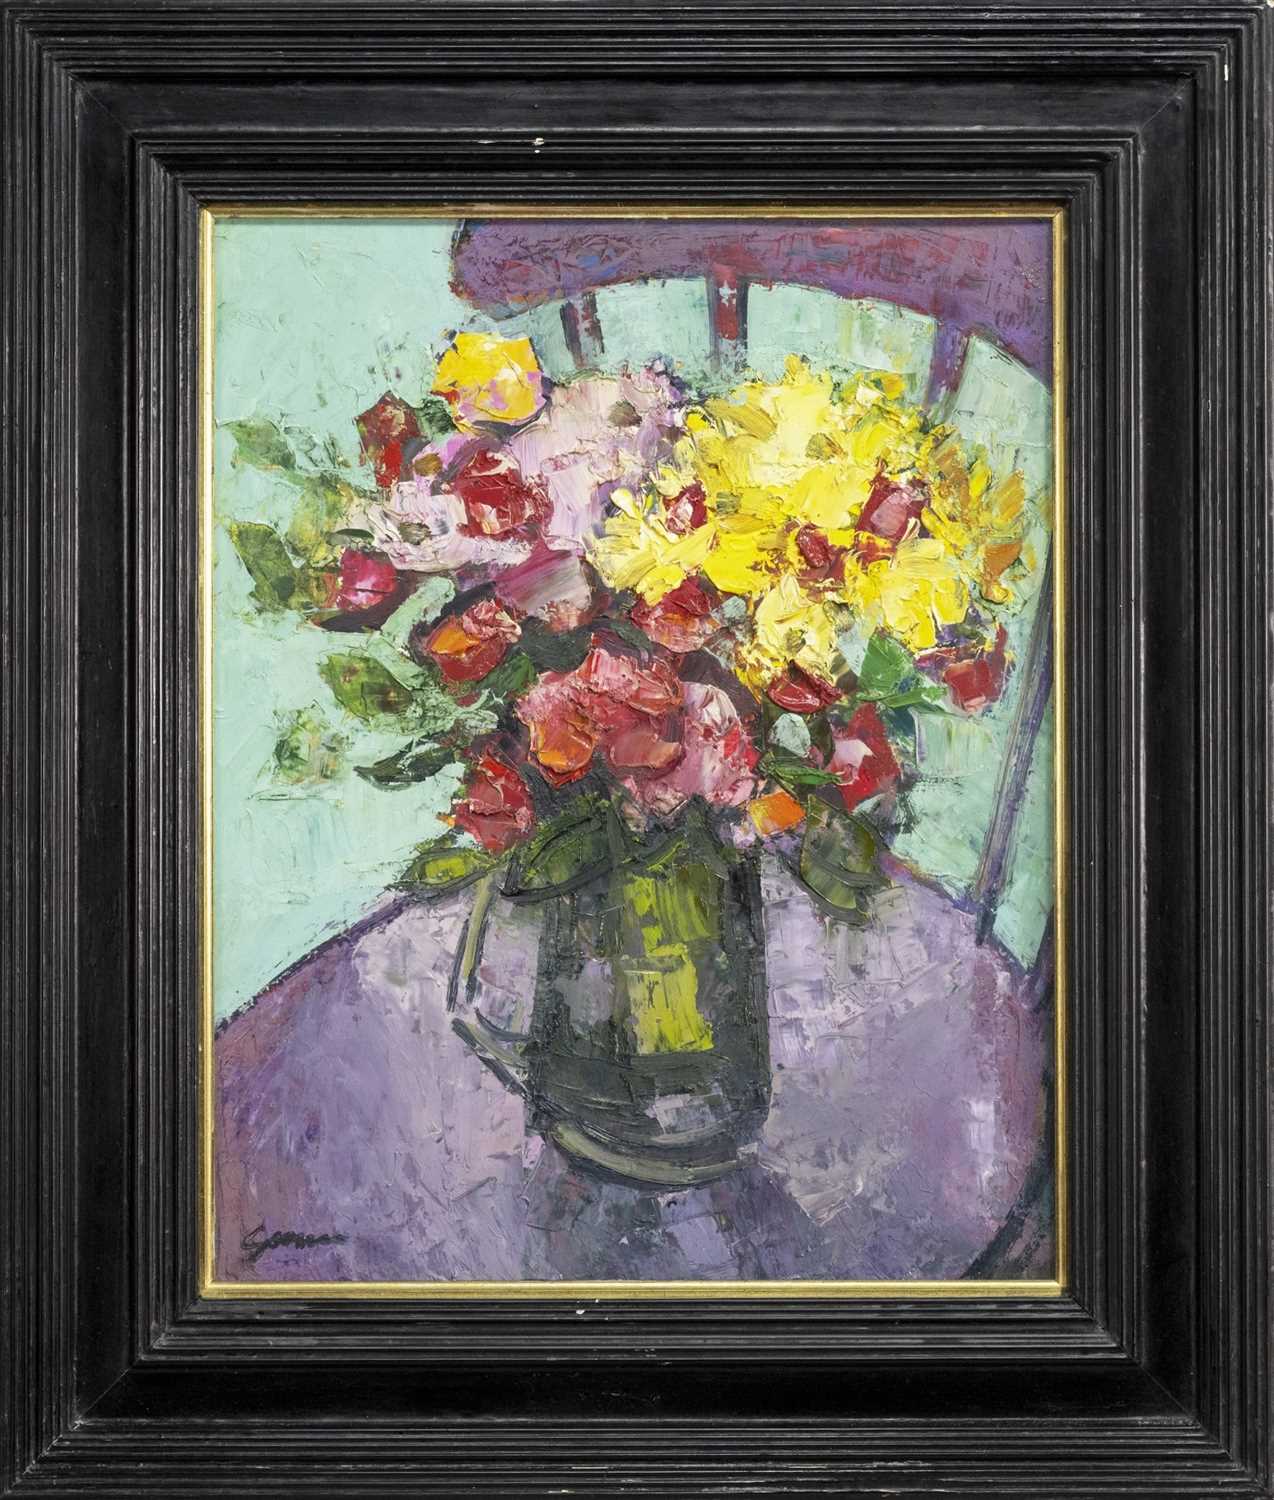 Lot 29 - FLOWERS ON A CHAIR, AN OIL BY DES GORMAN